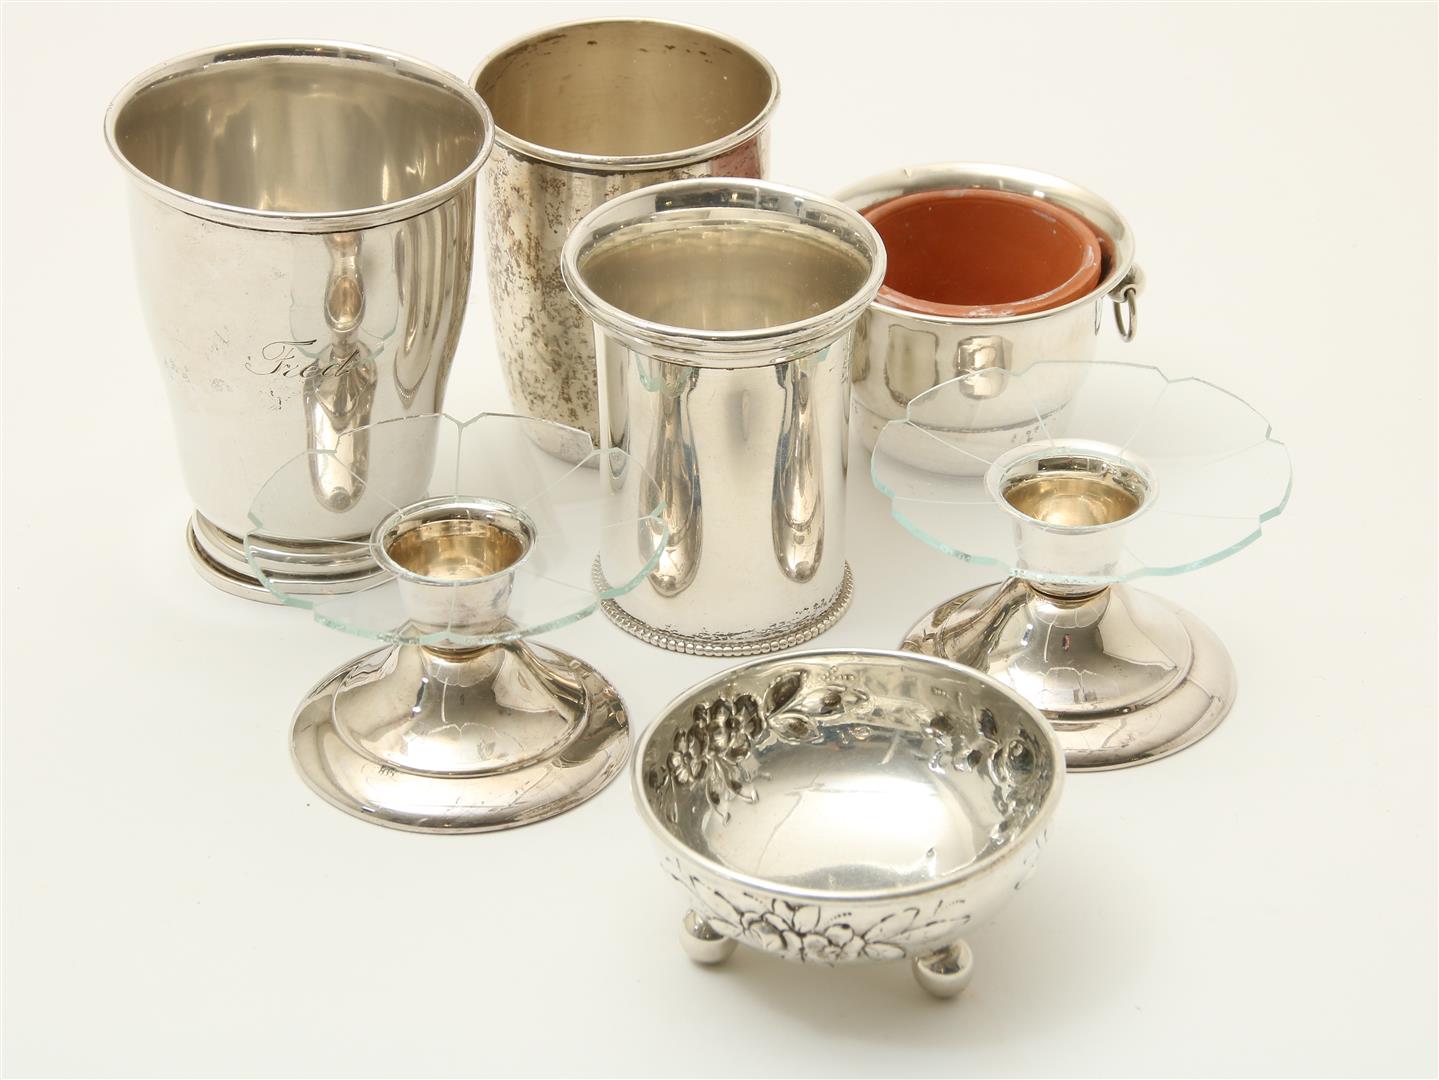 Various silver drinking cups and bowls, including two silver candle holders.